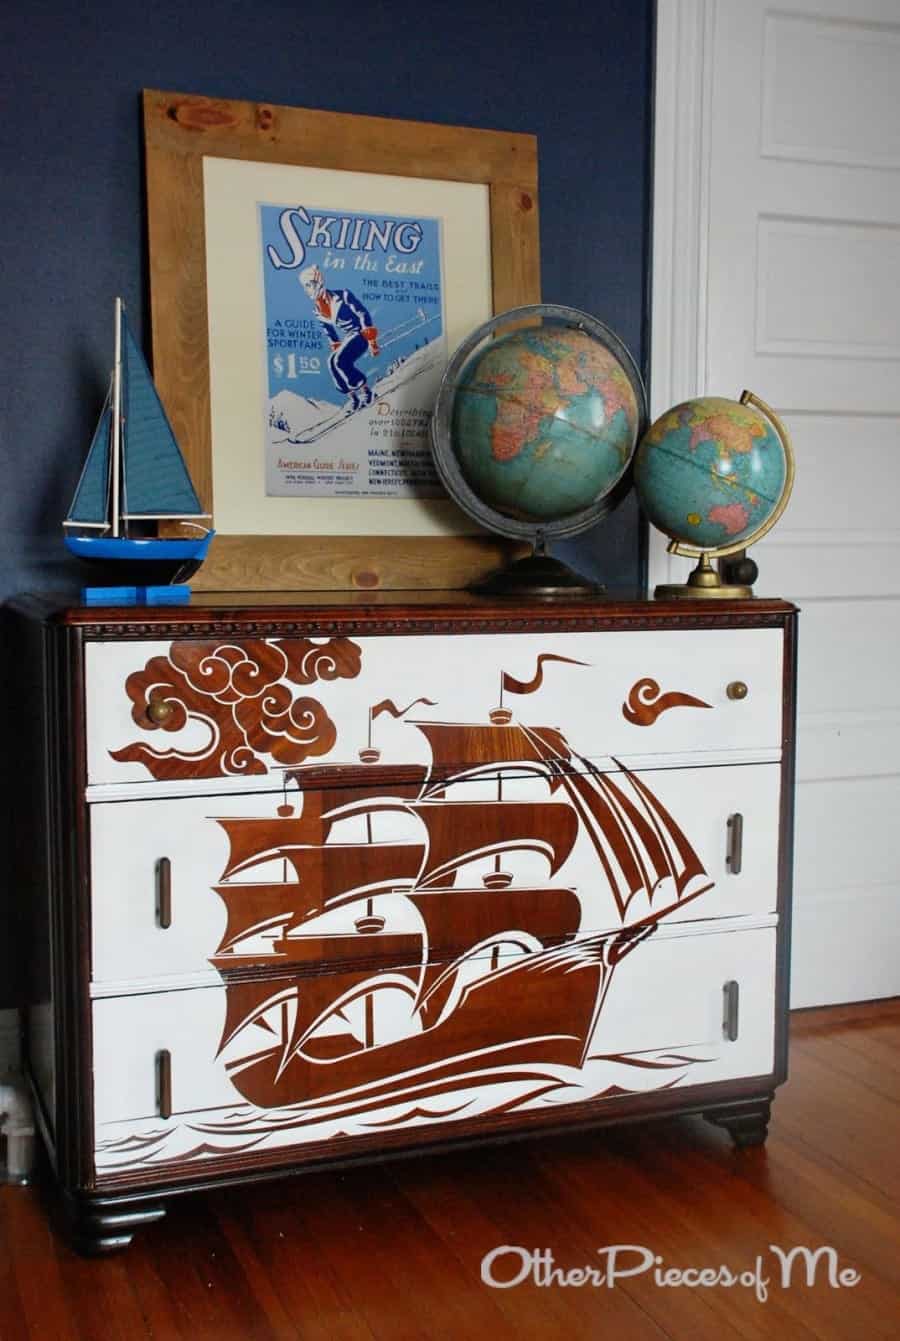 Instructions-on-how-to-use-decals-and-paint-on